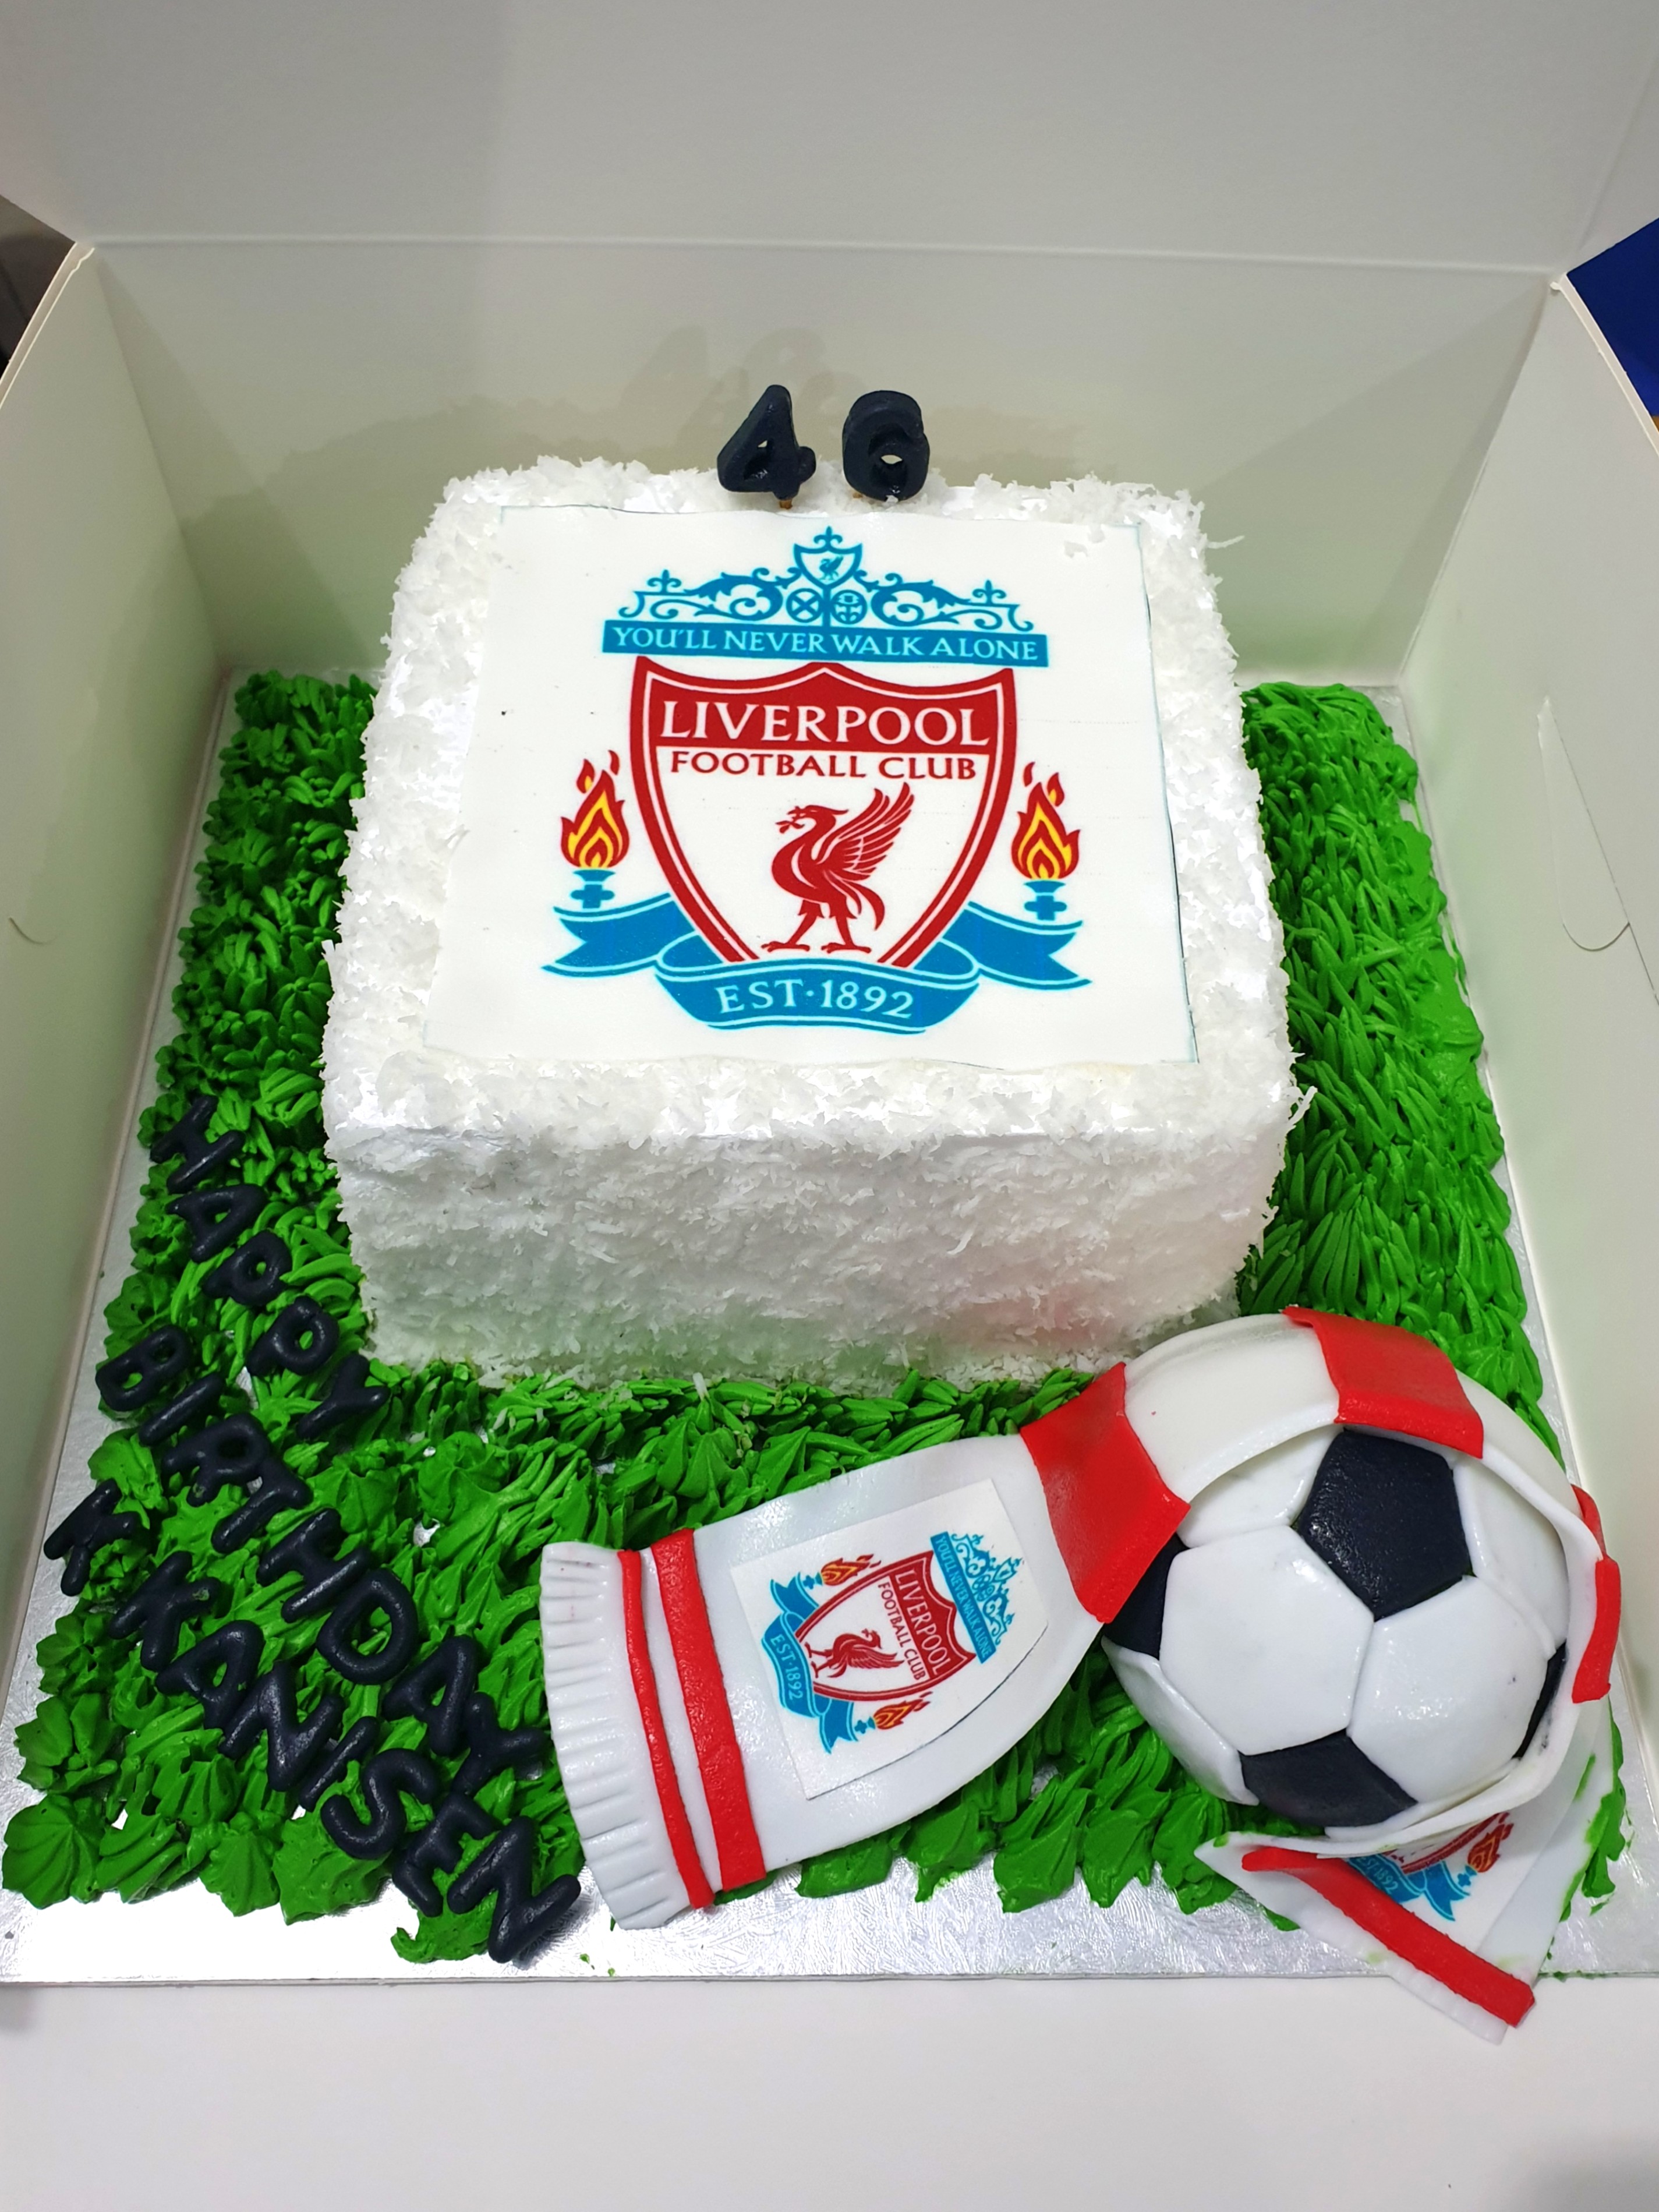 Beautiful Liverpool themed cake thank you for choosing us 🙏🏻 Call  0716650801 | Instagram